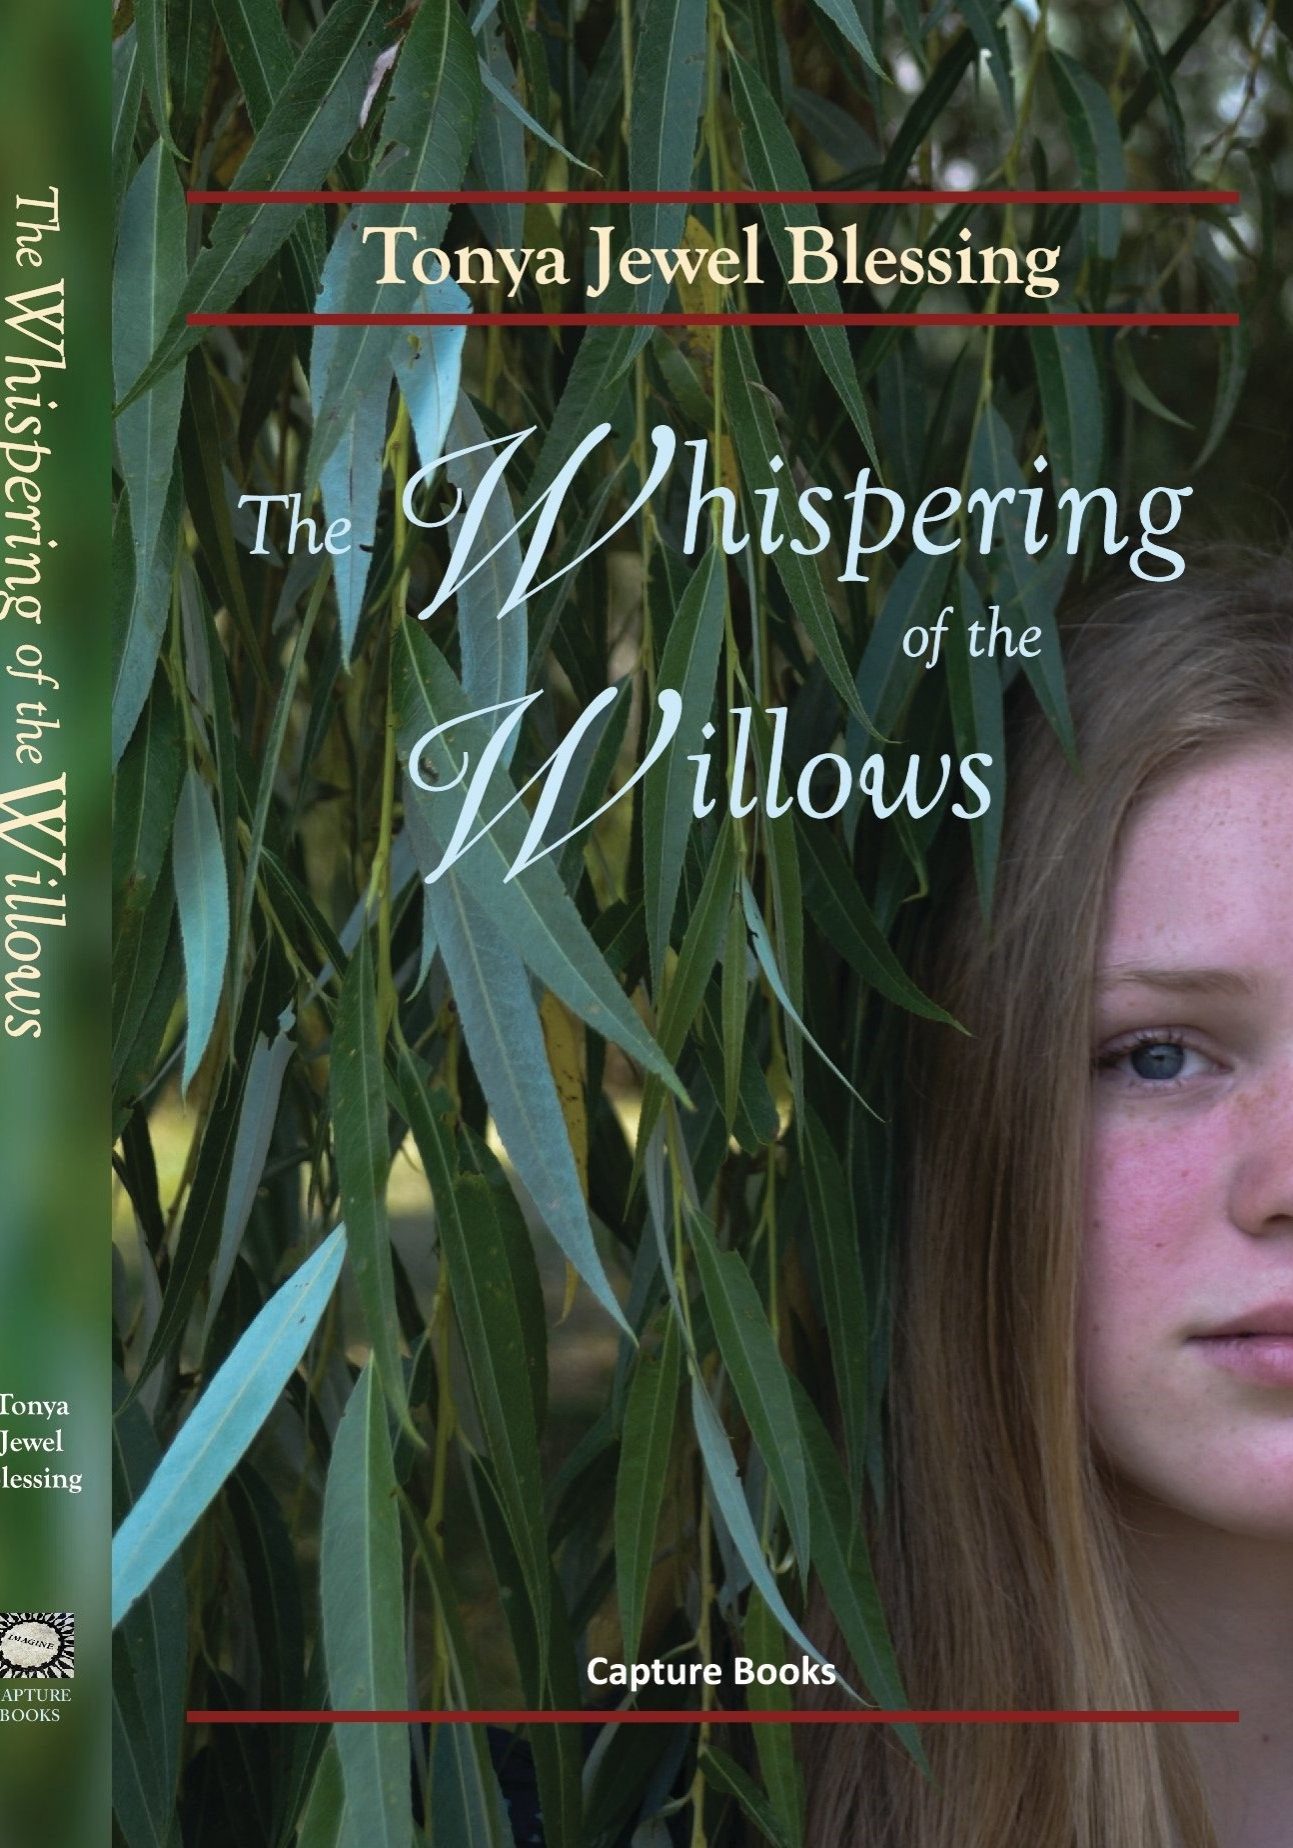 Whispering of the willows book trailer loewenherz creative